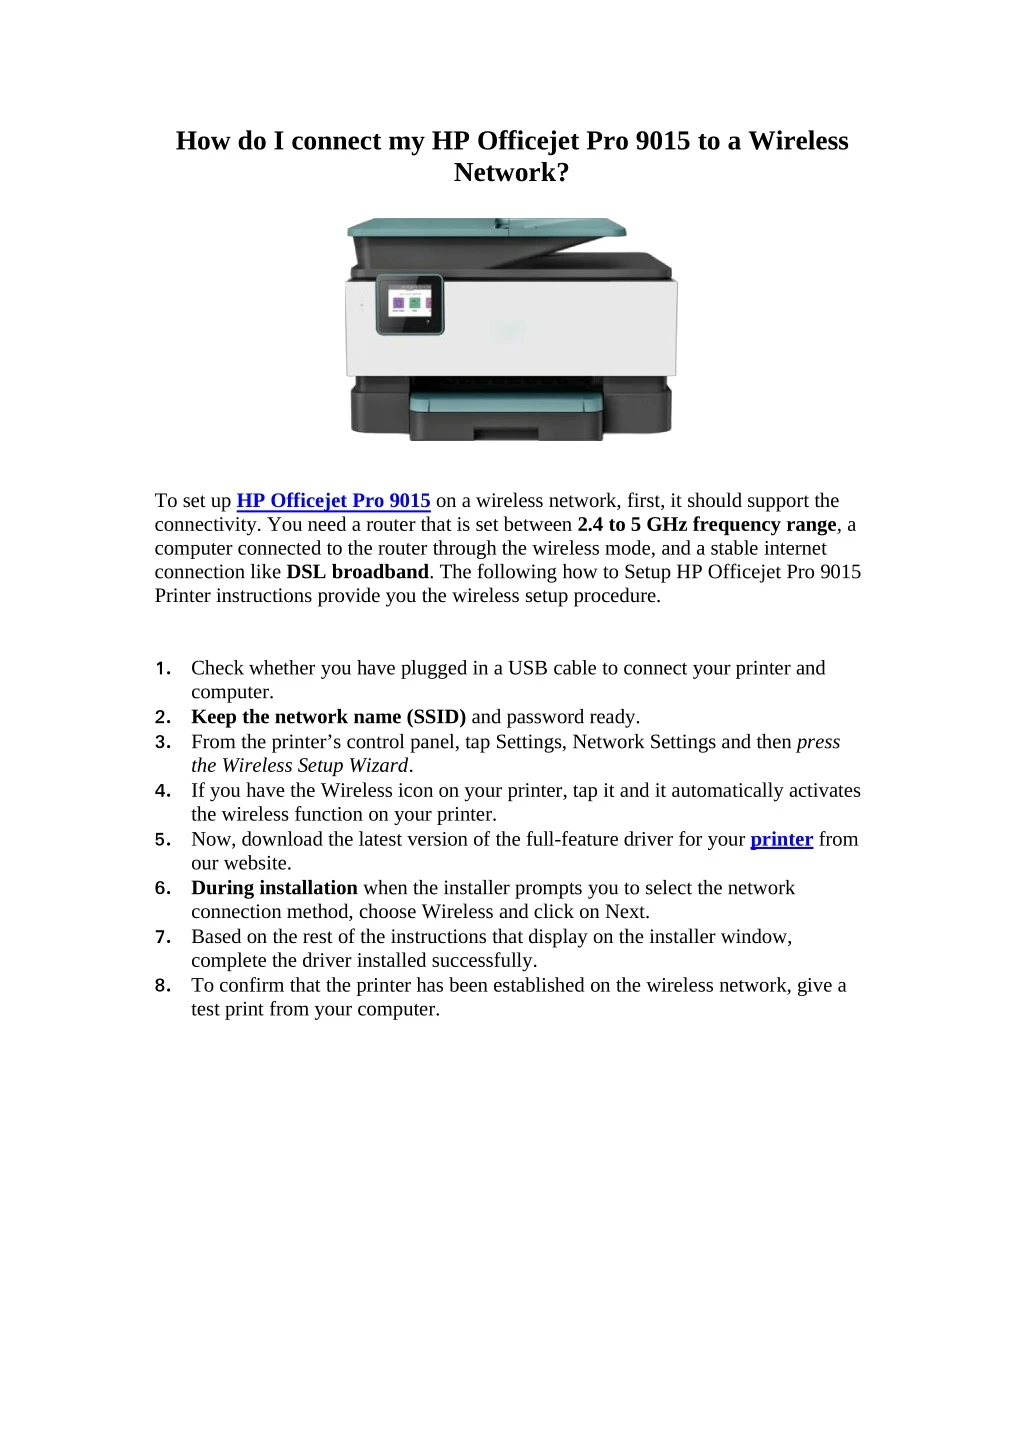 how do i connect my hp officejet pro 9015